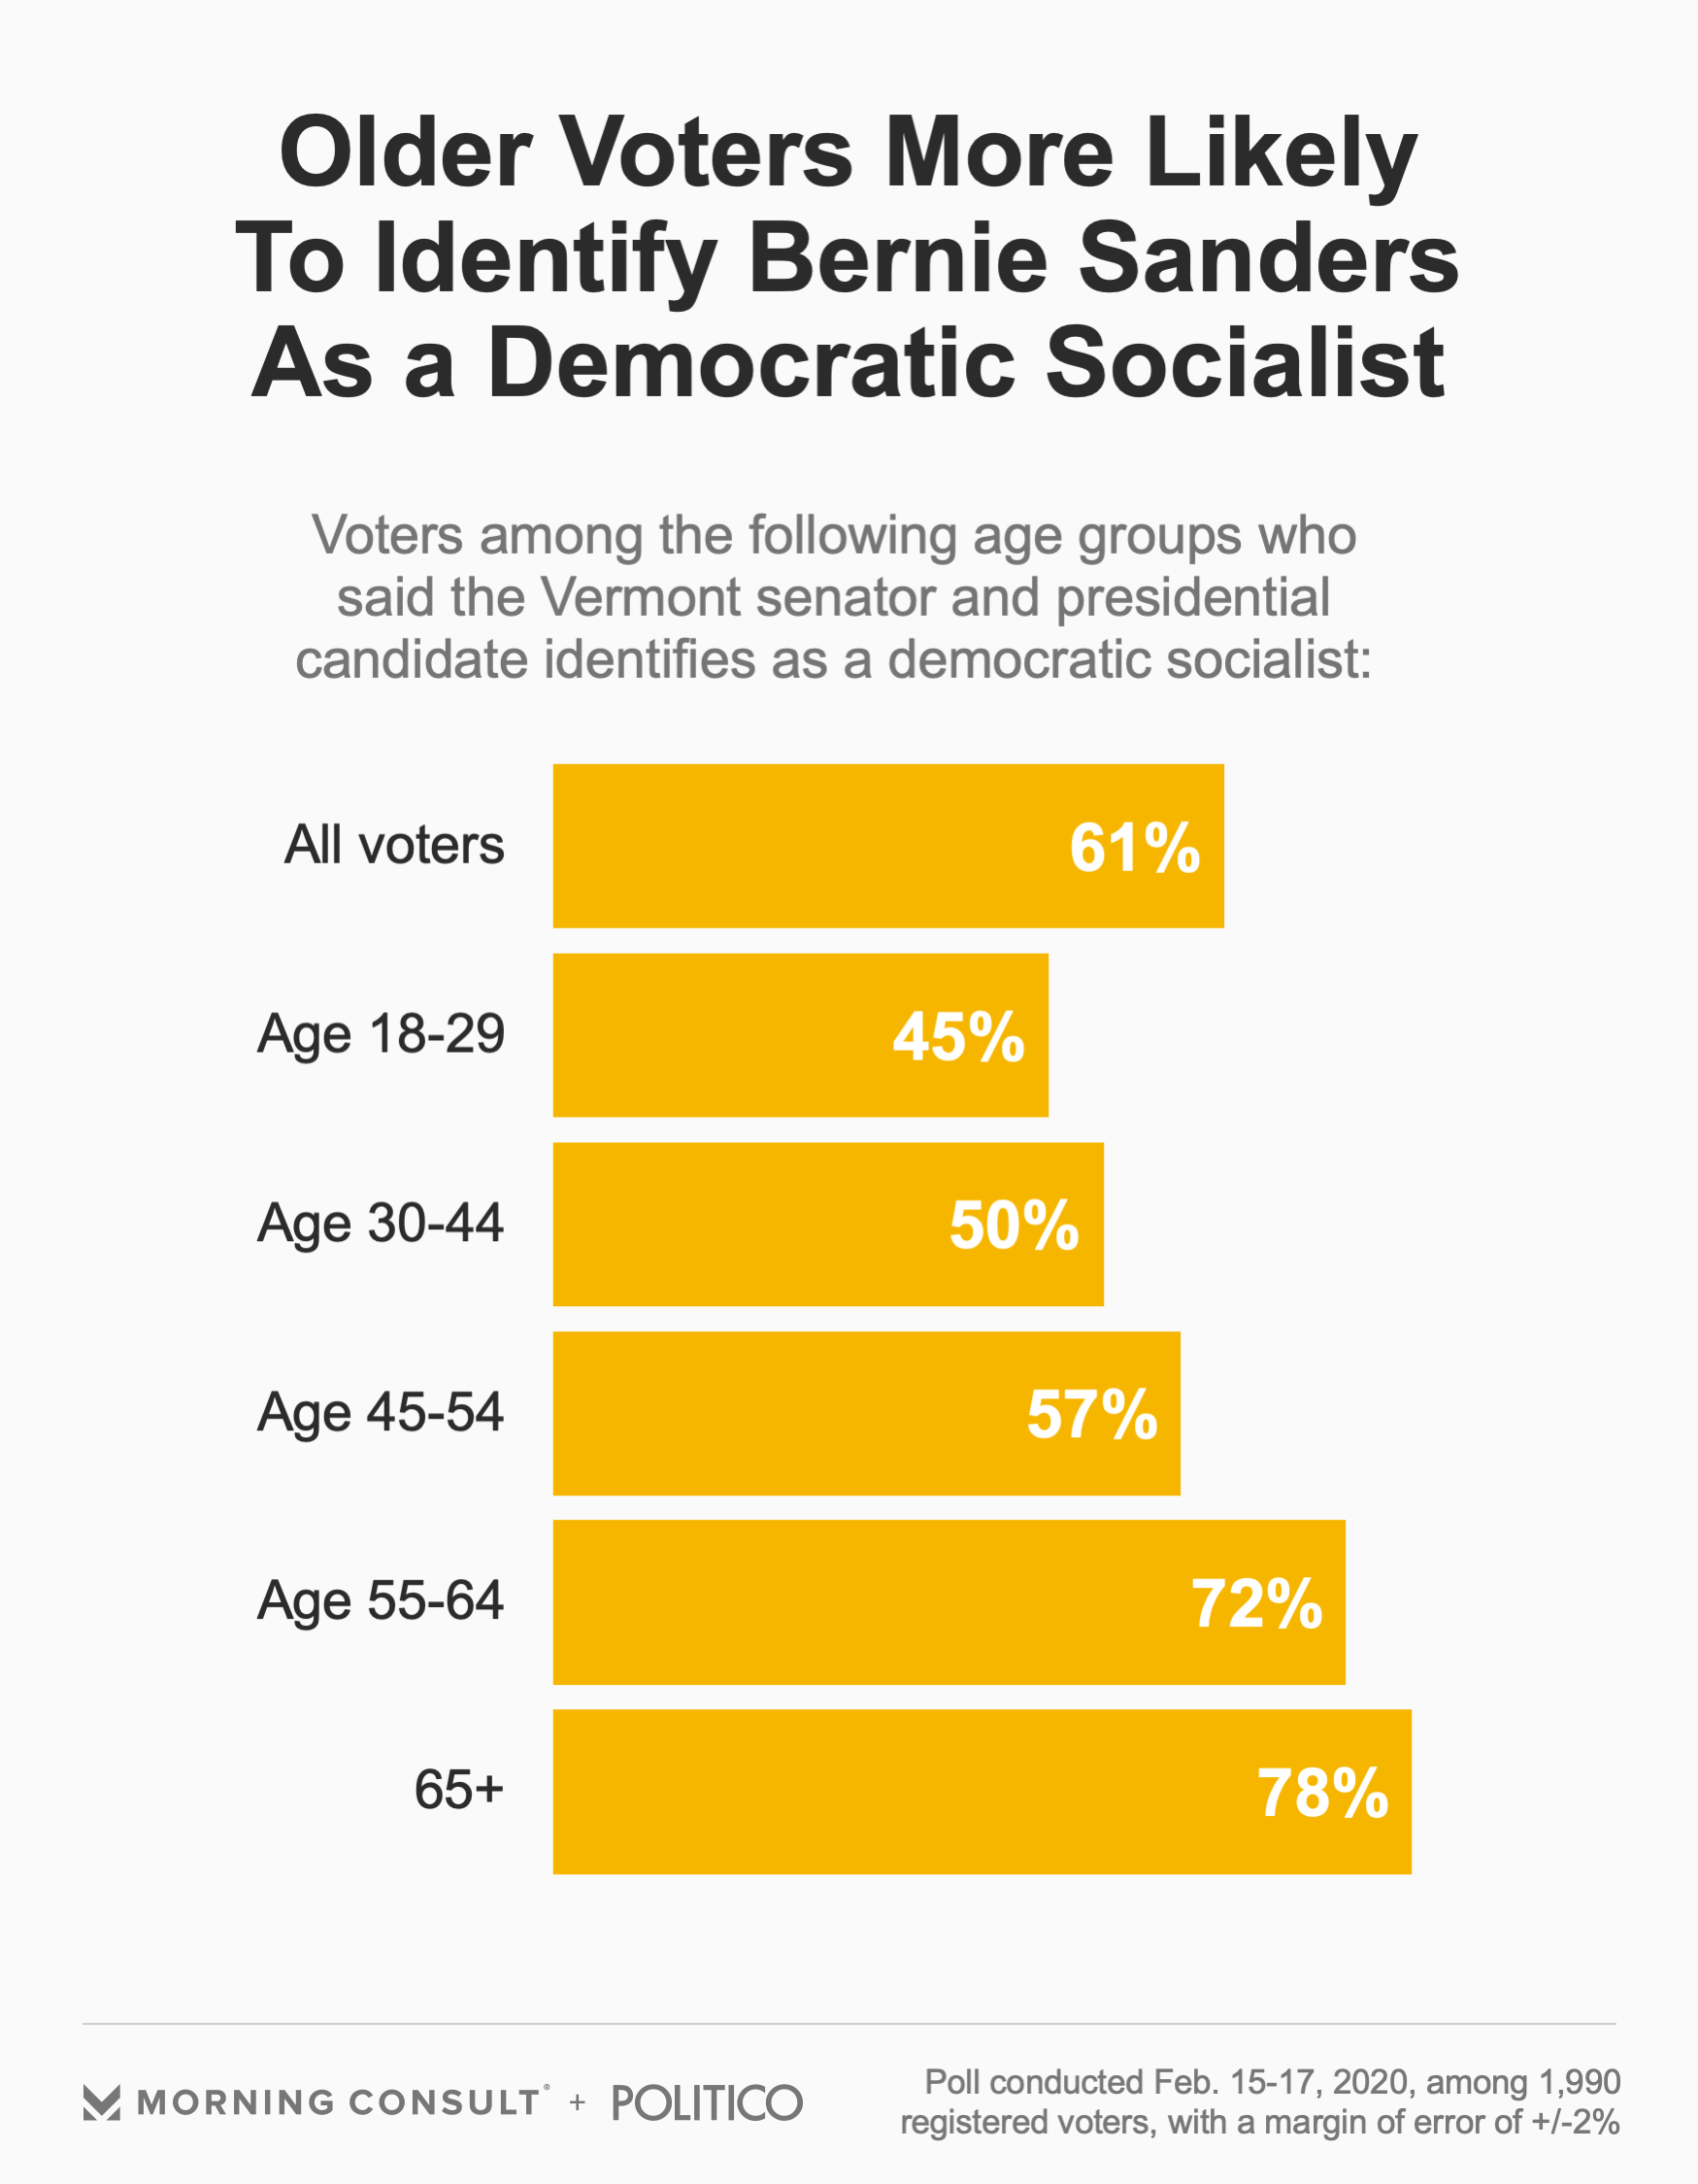 How the Democratic Socialist Label Is Playing in the 2020 Presidential Race